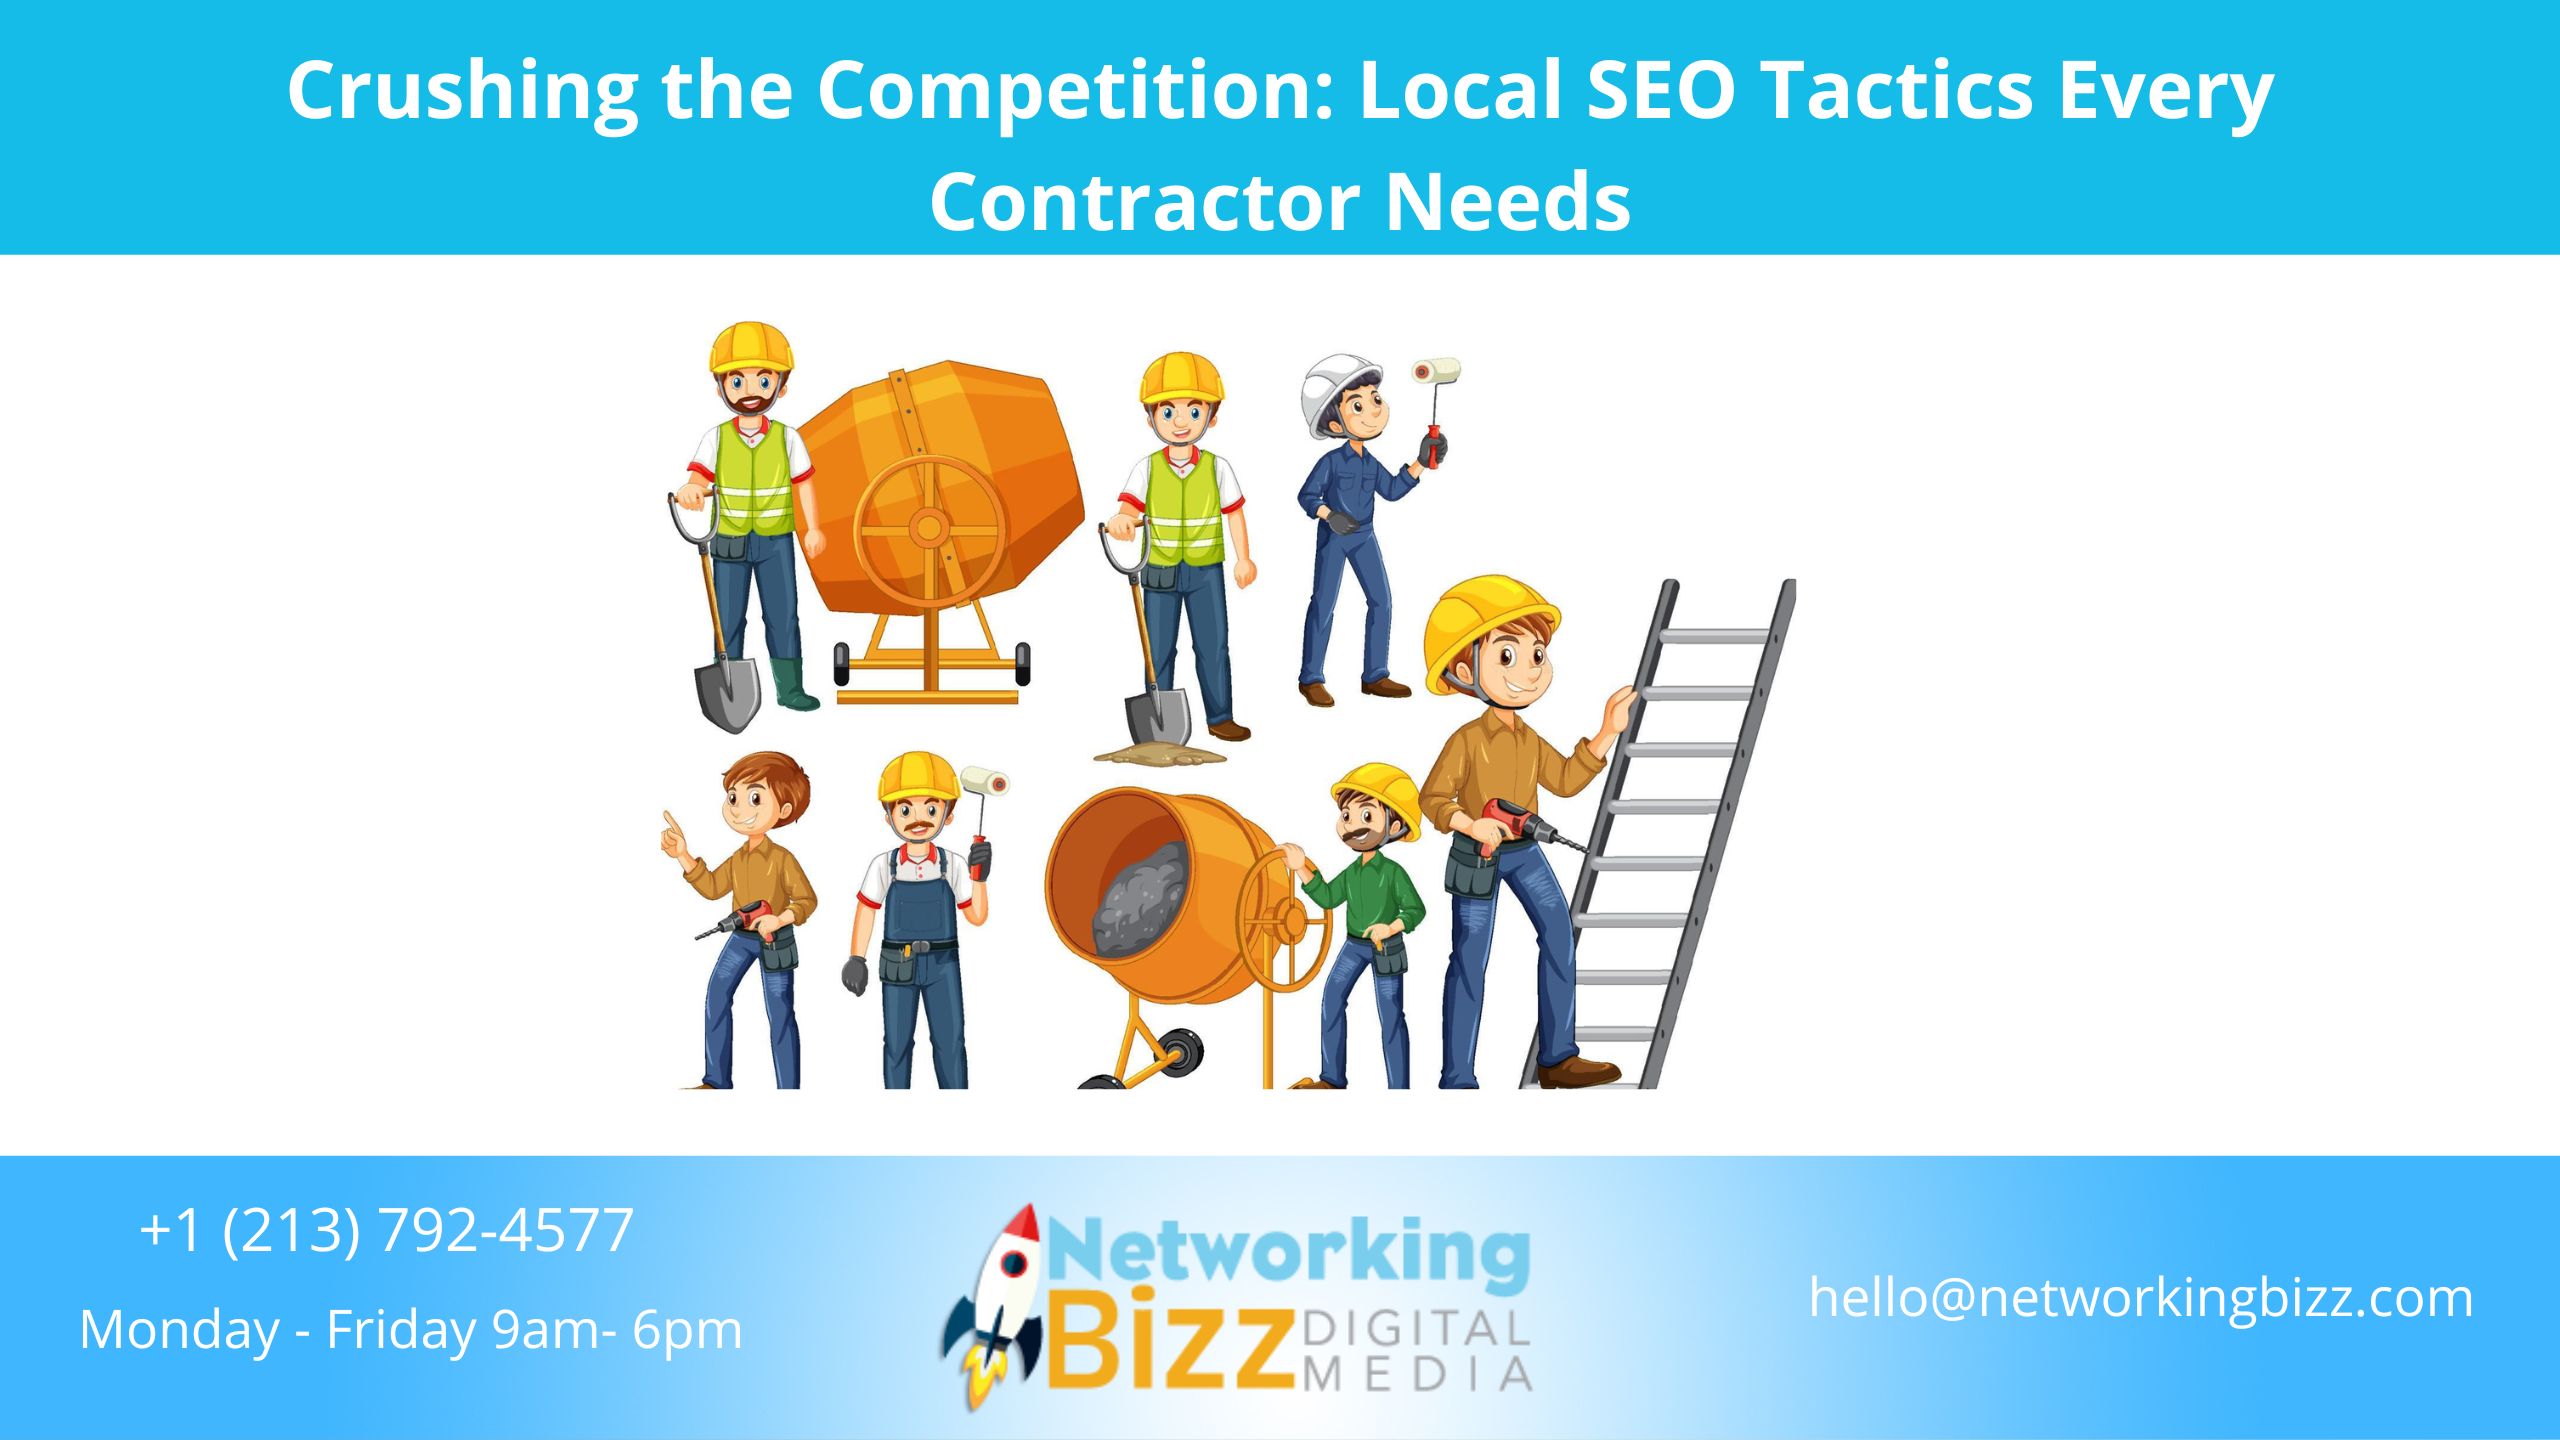 Crushing The Competition: Local SEO Tactics Every Contractor Needs